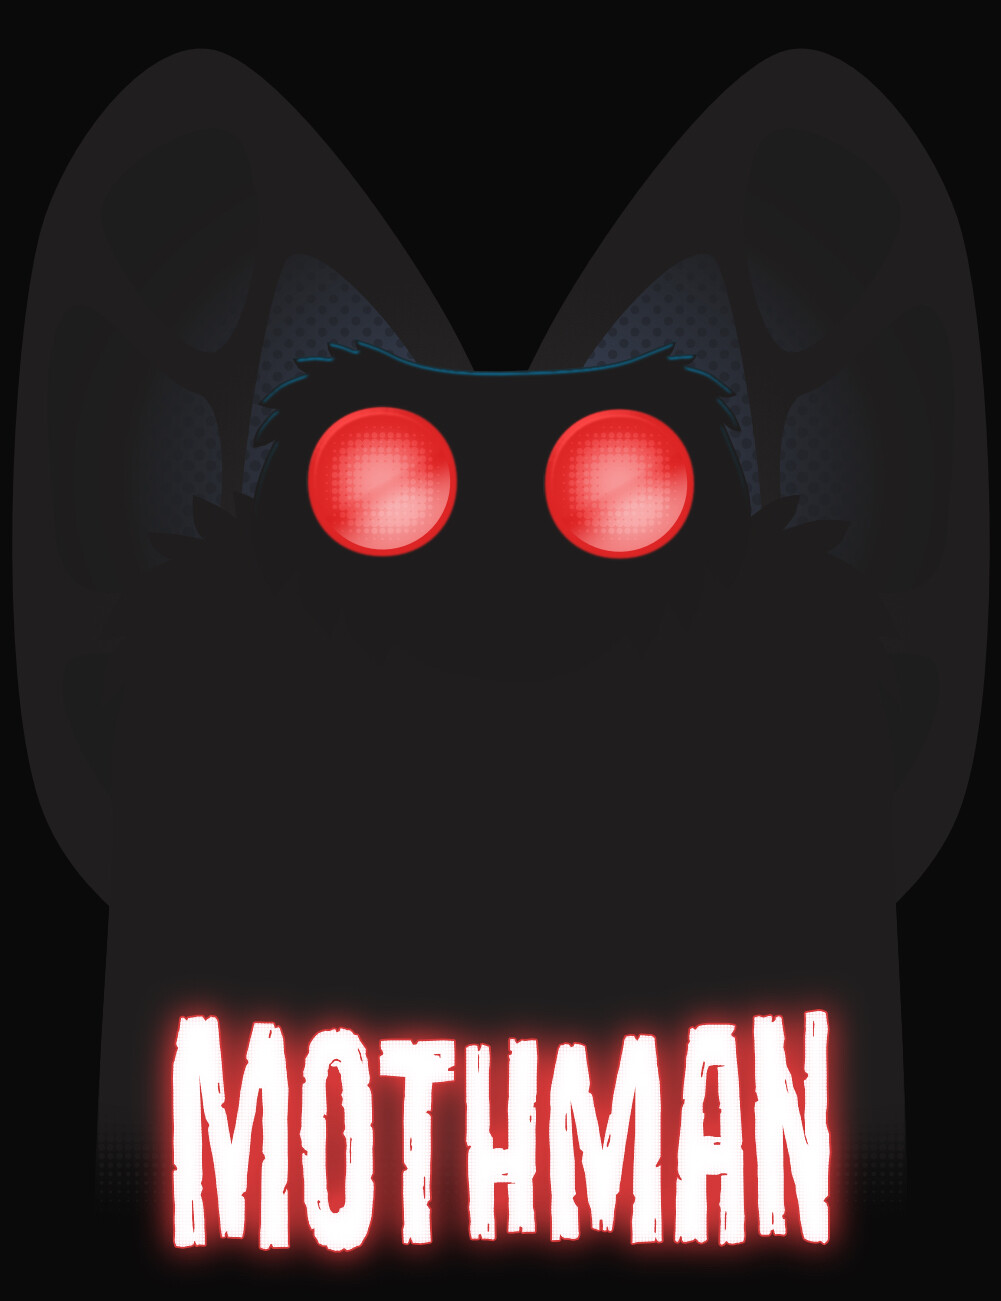 Neato (high-quality t-shirts, large sizes):
https://www.neatoshop.com/product/Cryptid-Legend-Mothman-T-Shirt
TeePublic (affordable shirts and stickers):
https://www.teepublic.com/t-shirt/36649435-cryptid-legend-mothman?store_id=2013963